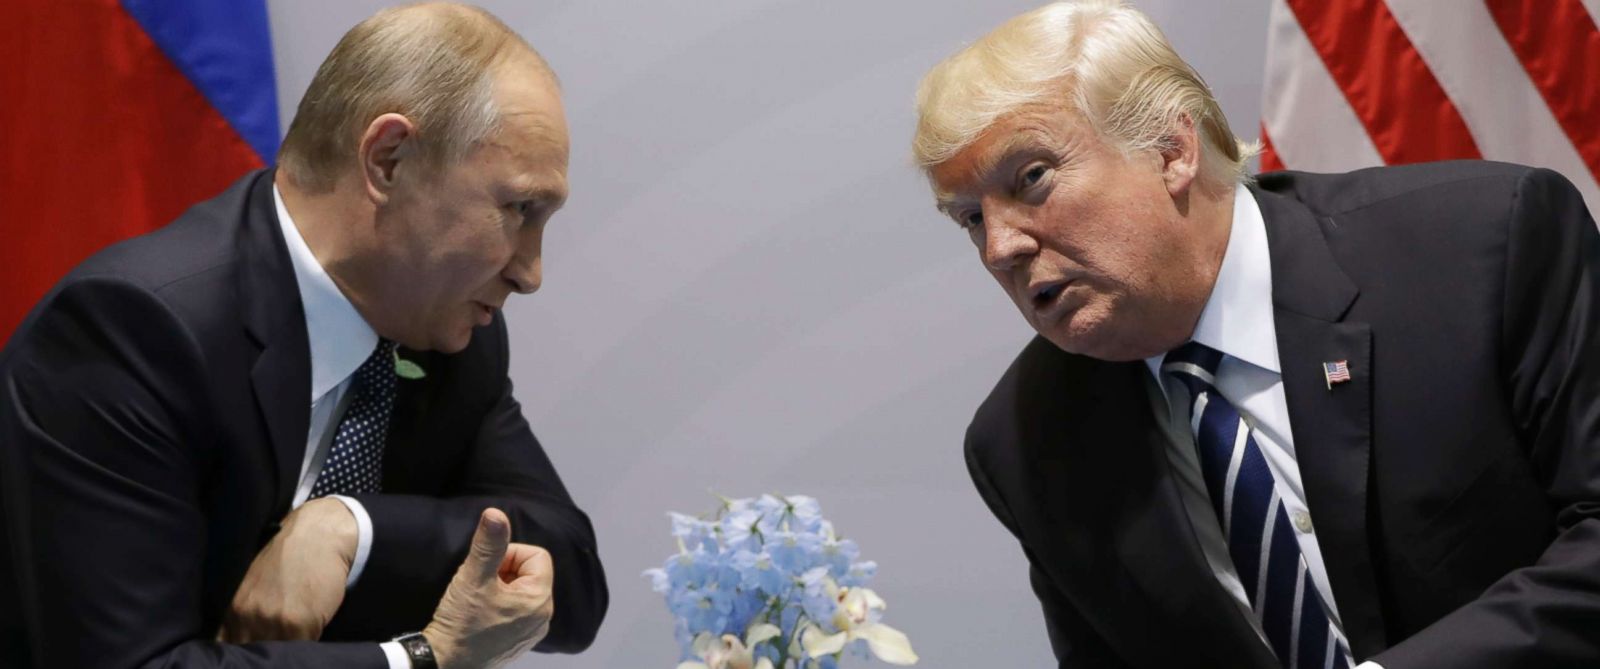 Image result for putin and trump